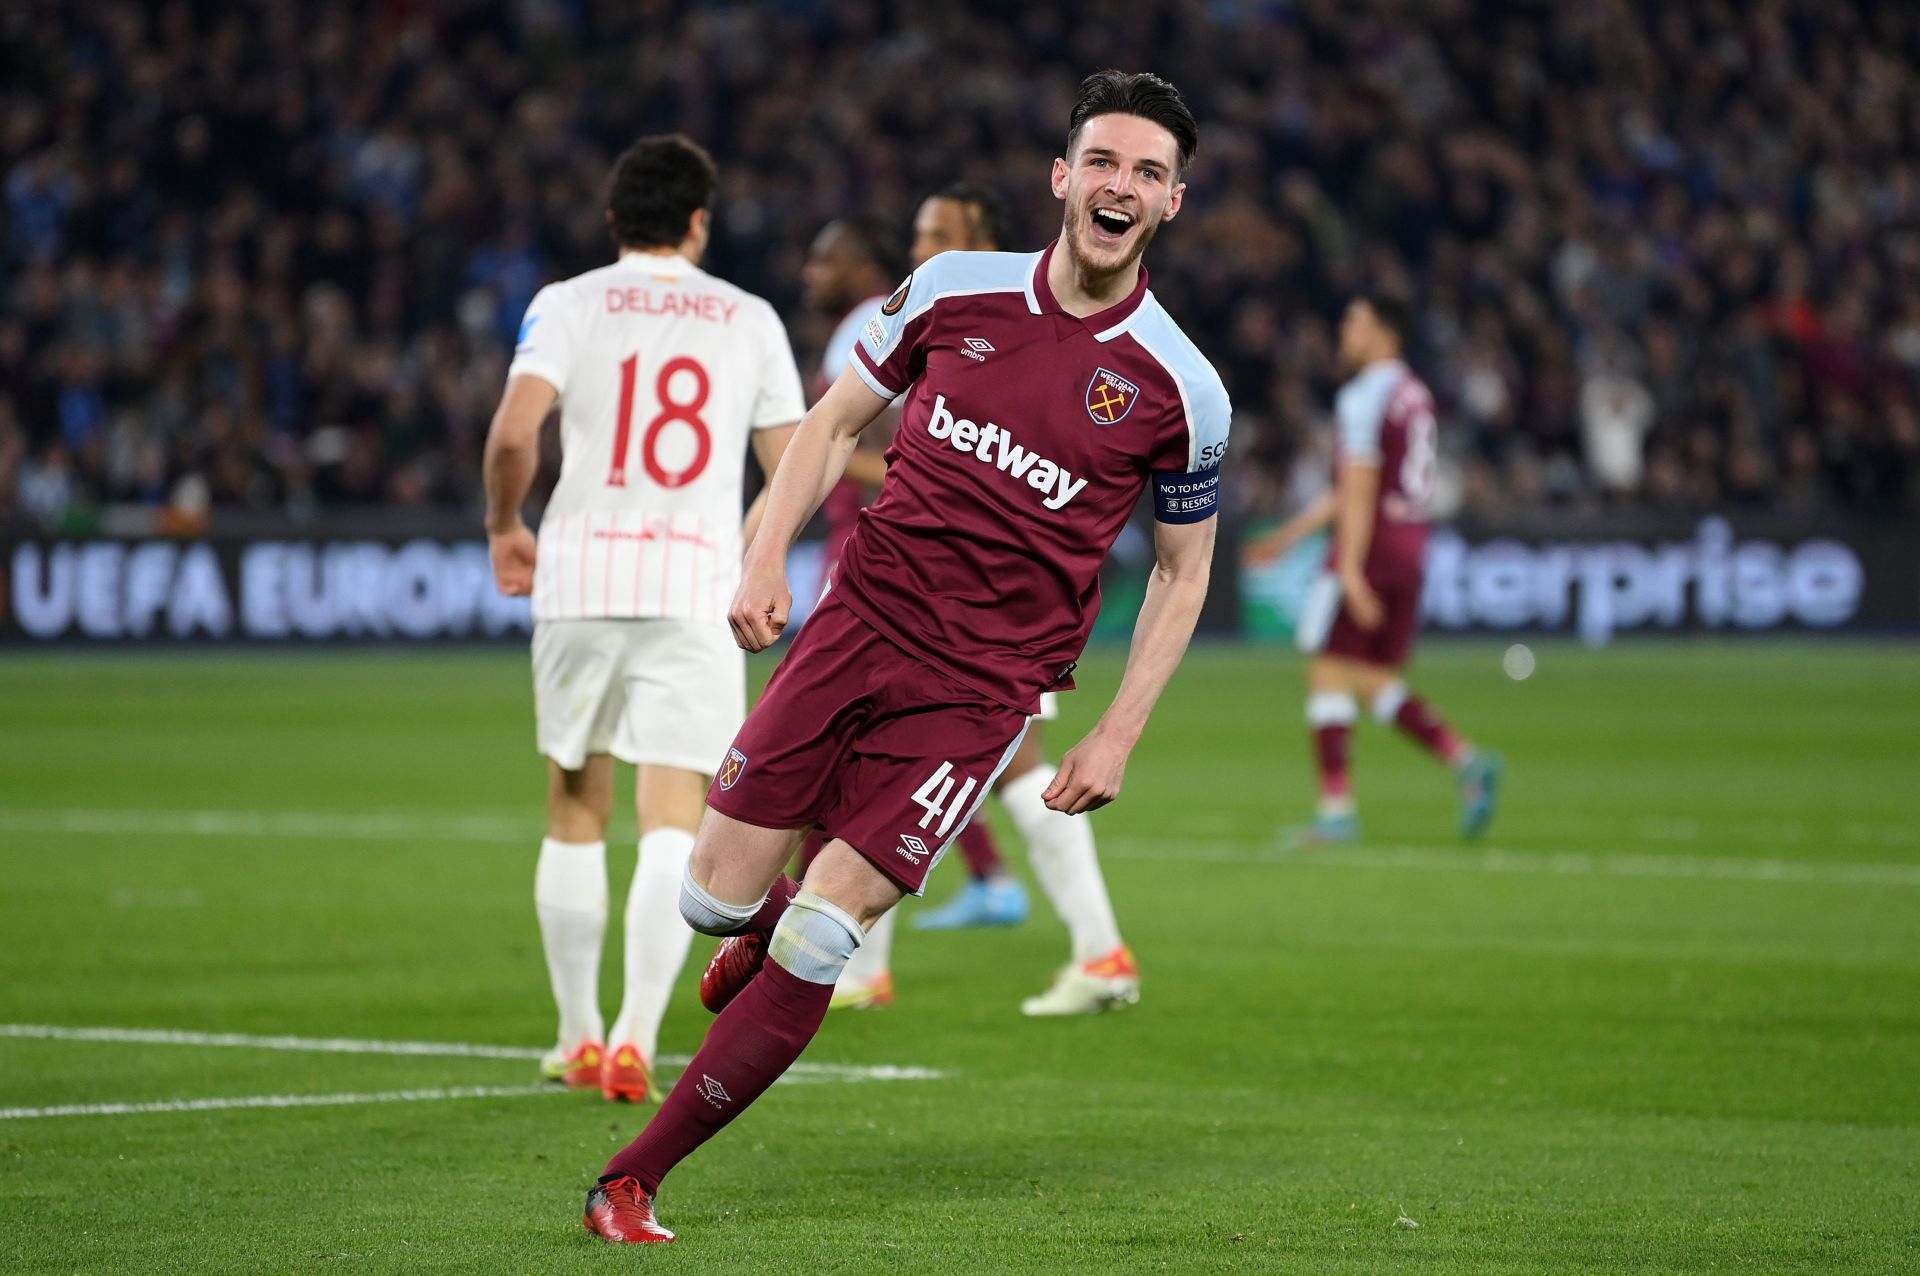 Declan Rice could arrive at Old Trafford this summer.